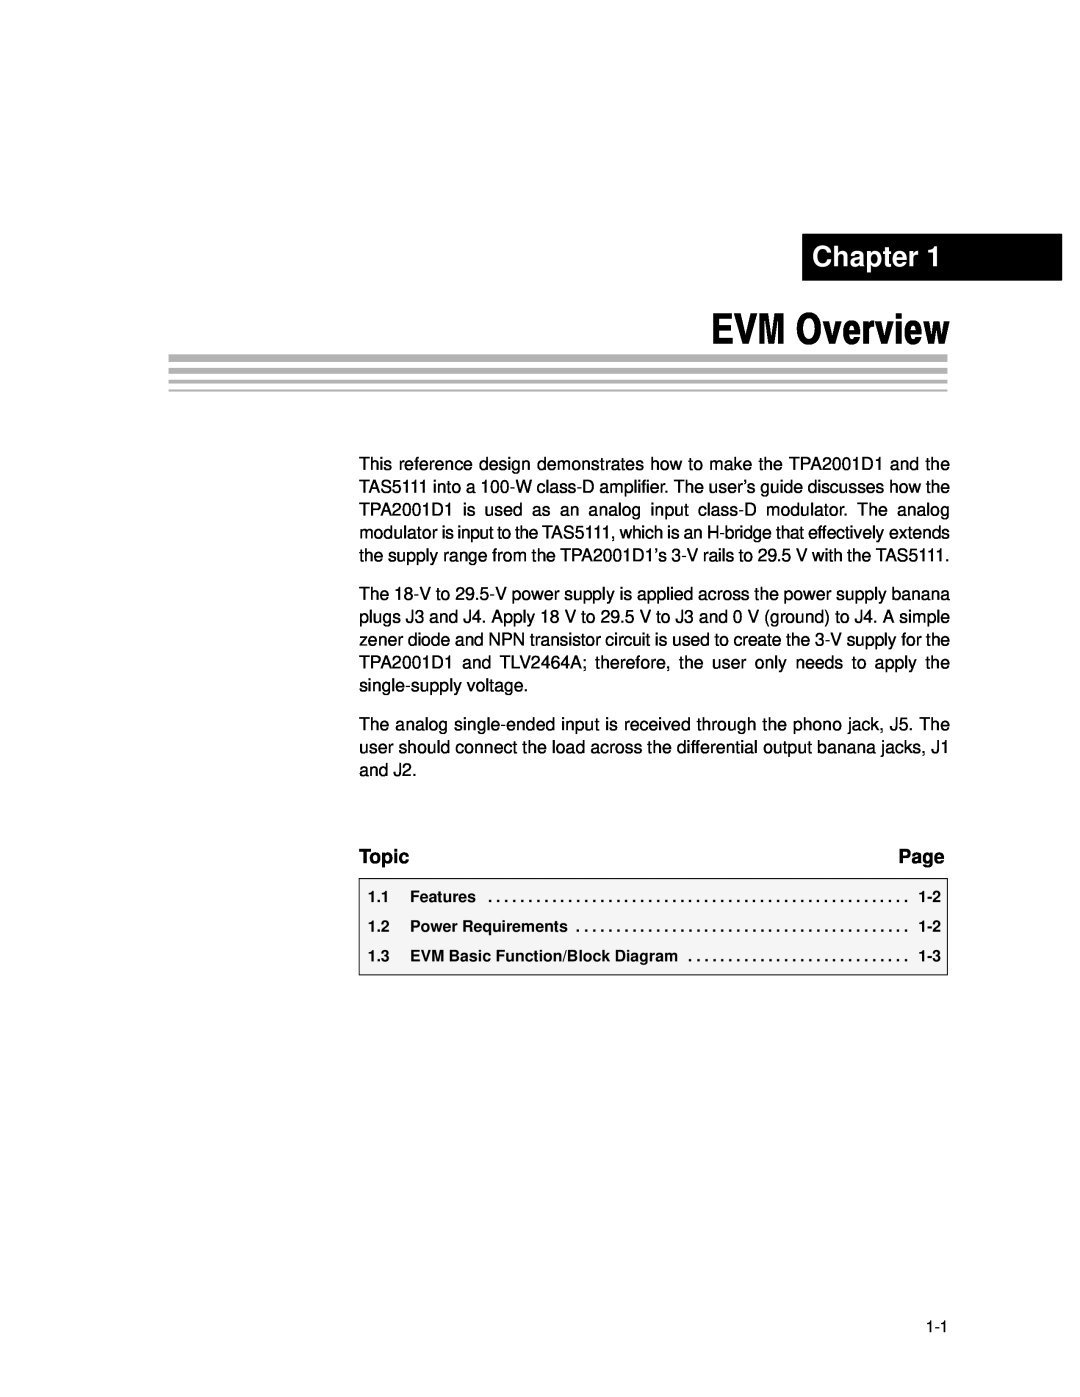 Texas Instruments APA100 manual EVM Overview, Chapter, Page, Topic 